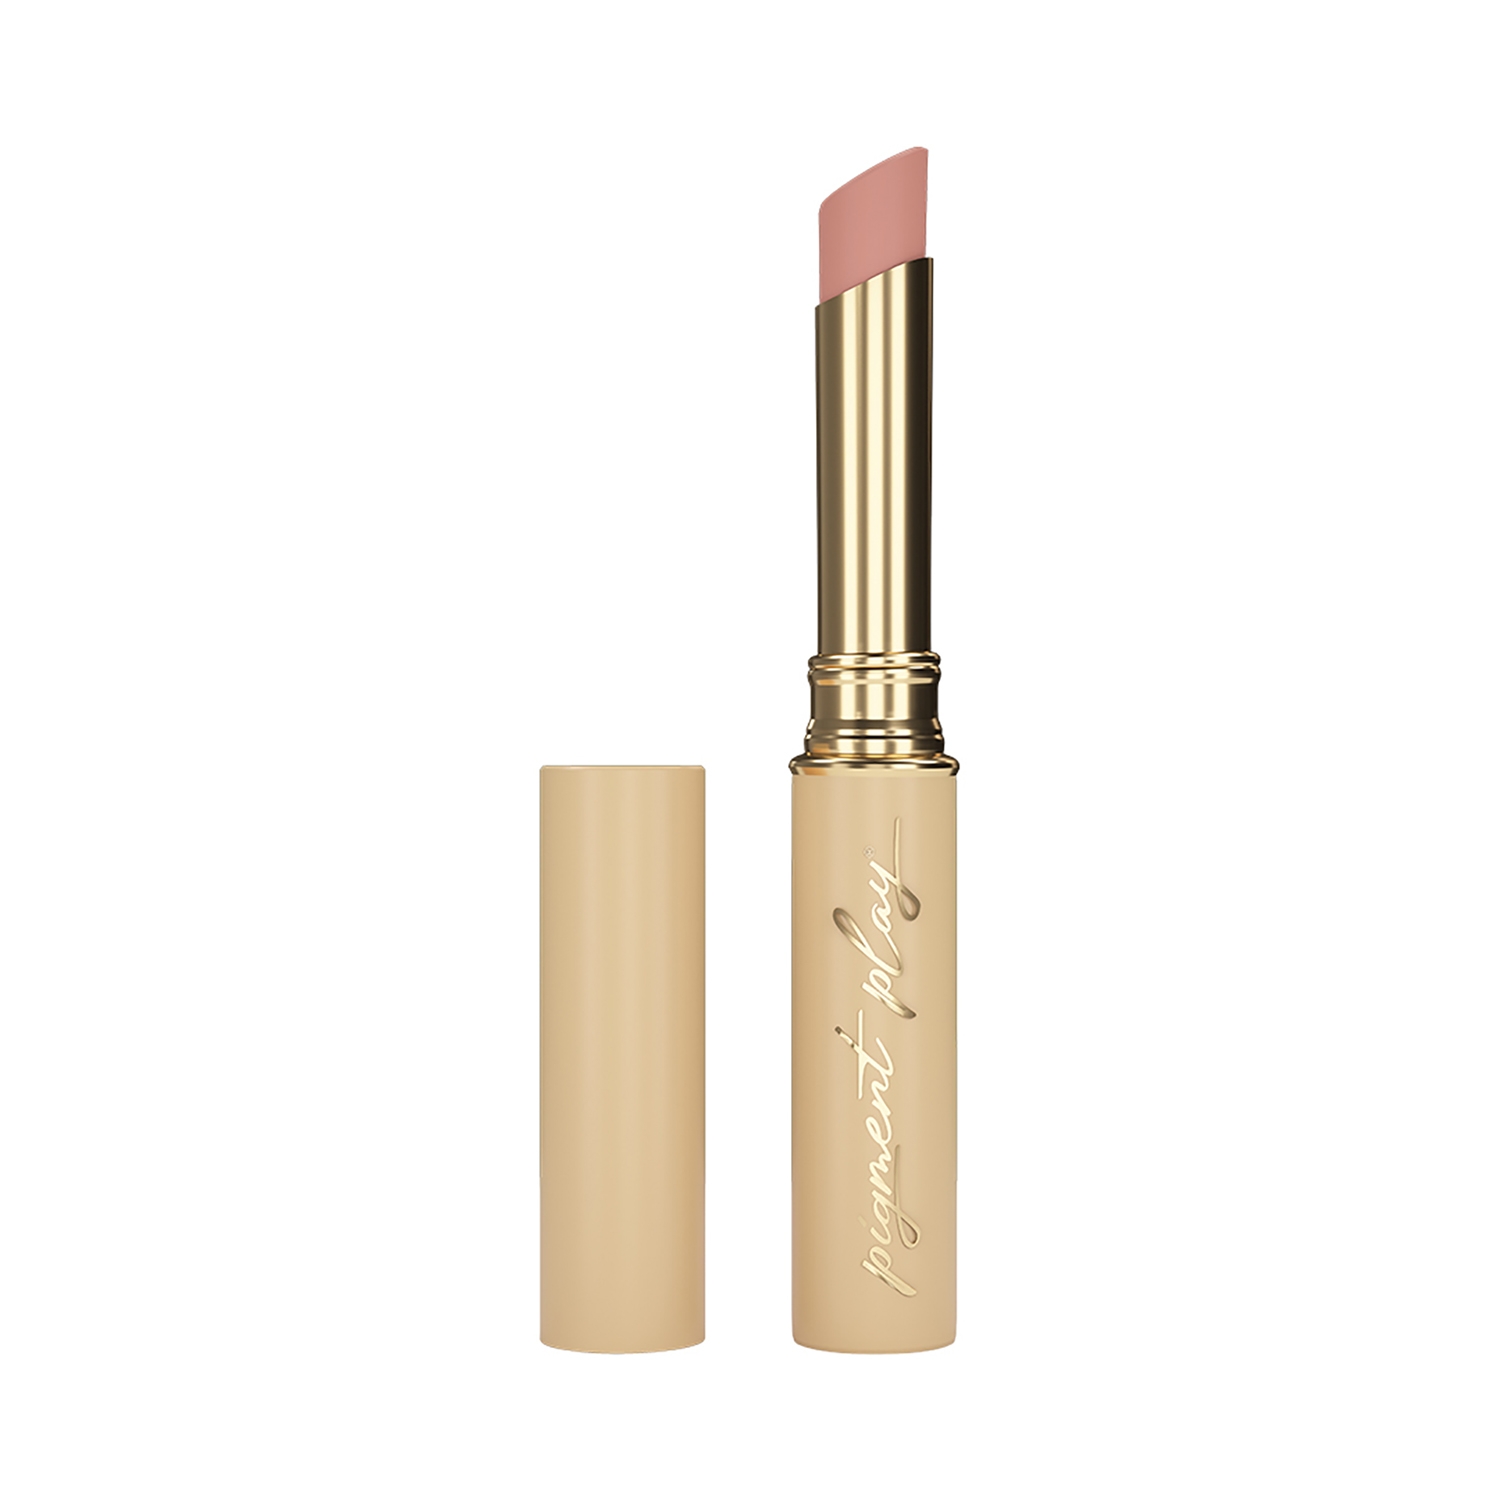 Pigment Play | Pigment Play Performer Matte Lipstick - Tinted Love (2.9g)